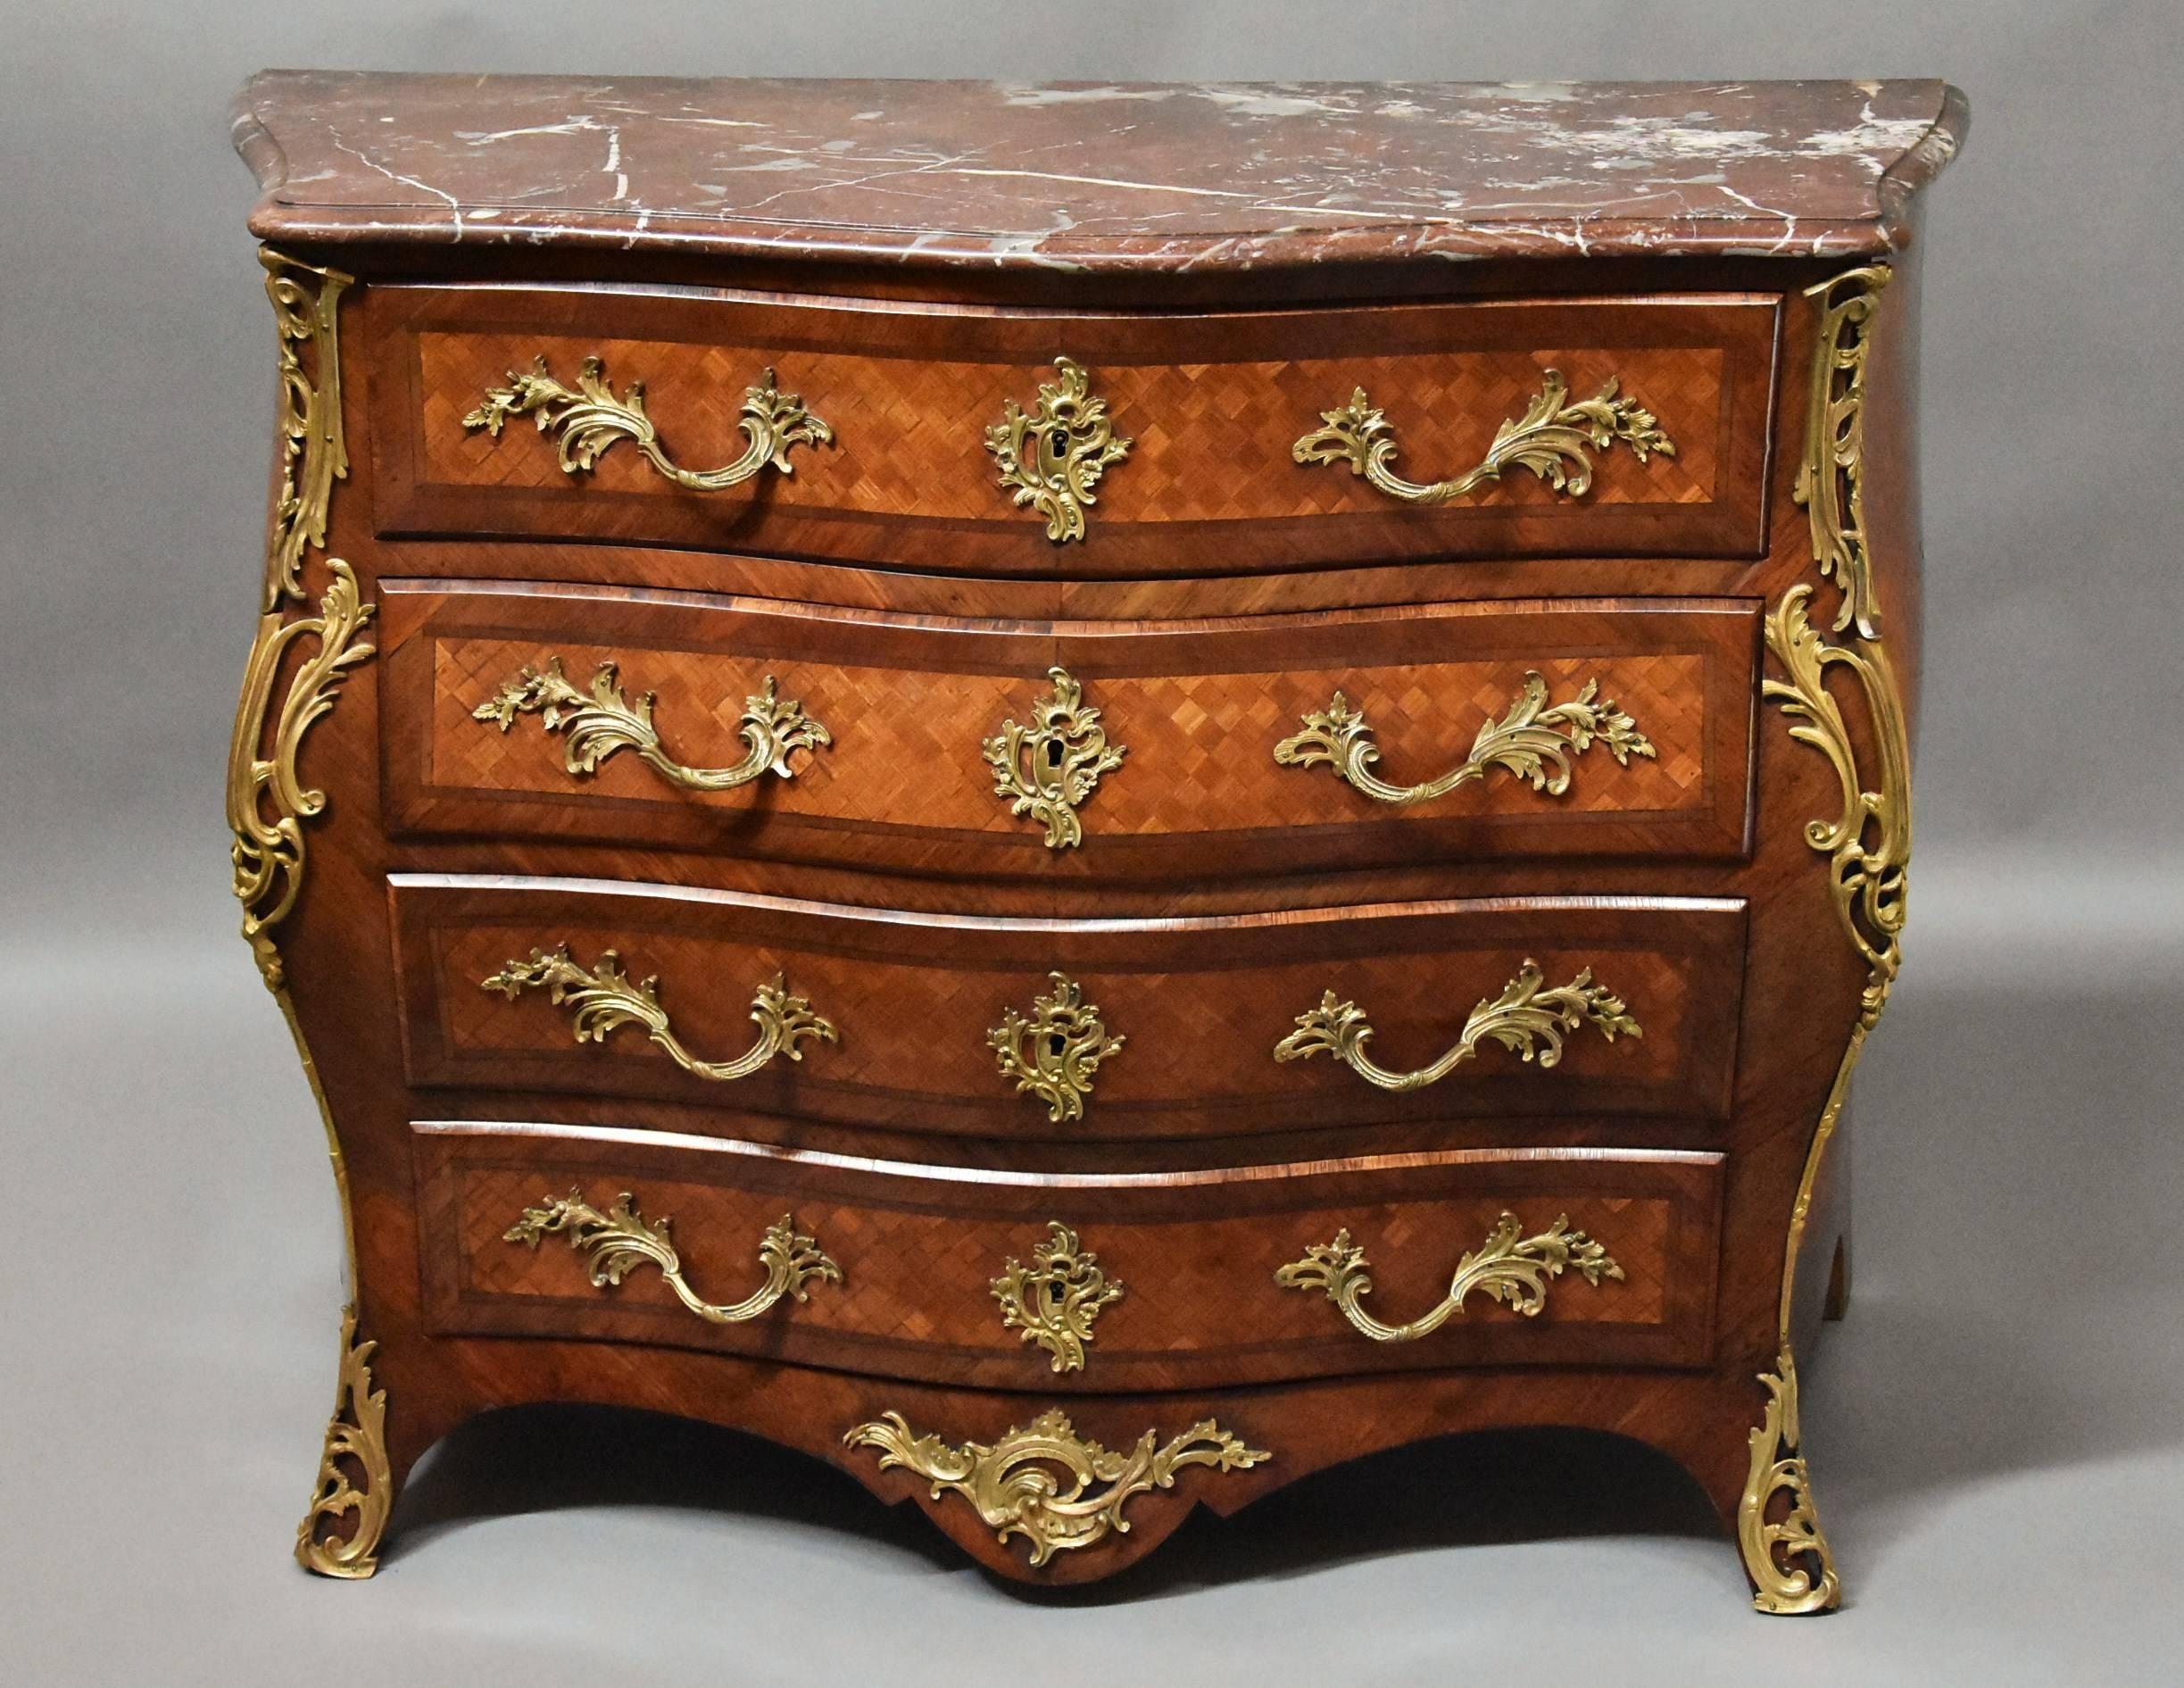 A 19th century French kingwood bombe serpentine commode with marble top.

This commode consists of a rouge marble-top in excellent condition of serpentine form to the front with shaped sides and a moulded edge.

This leads down to four